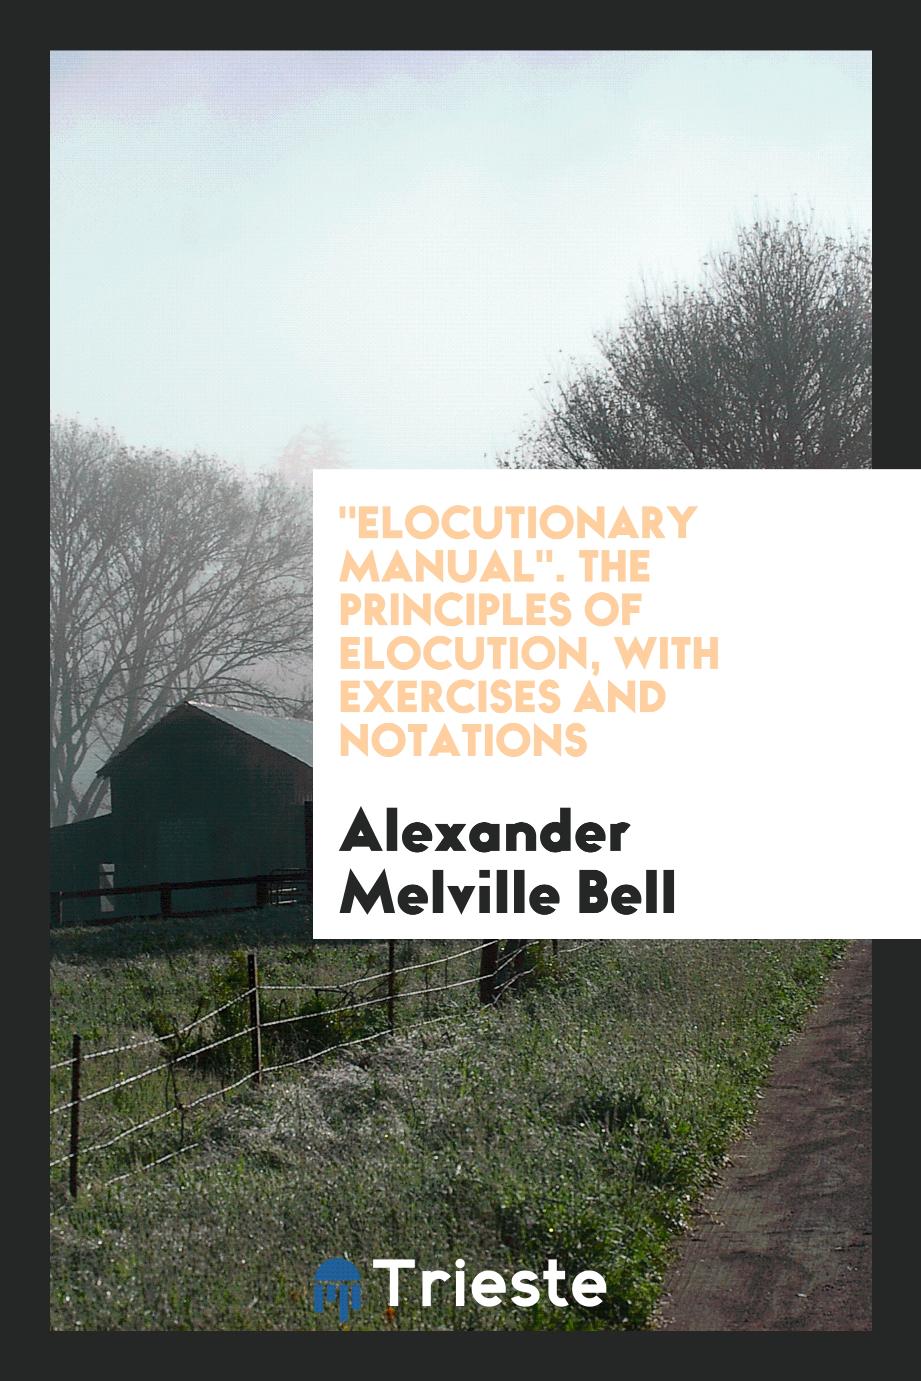 Alexander Melville Bell - "Elocutionary Manual". The Principles of Elocution, with Exercises and Notations